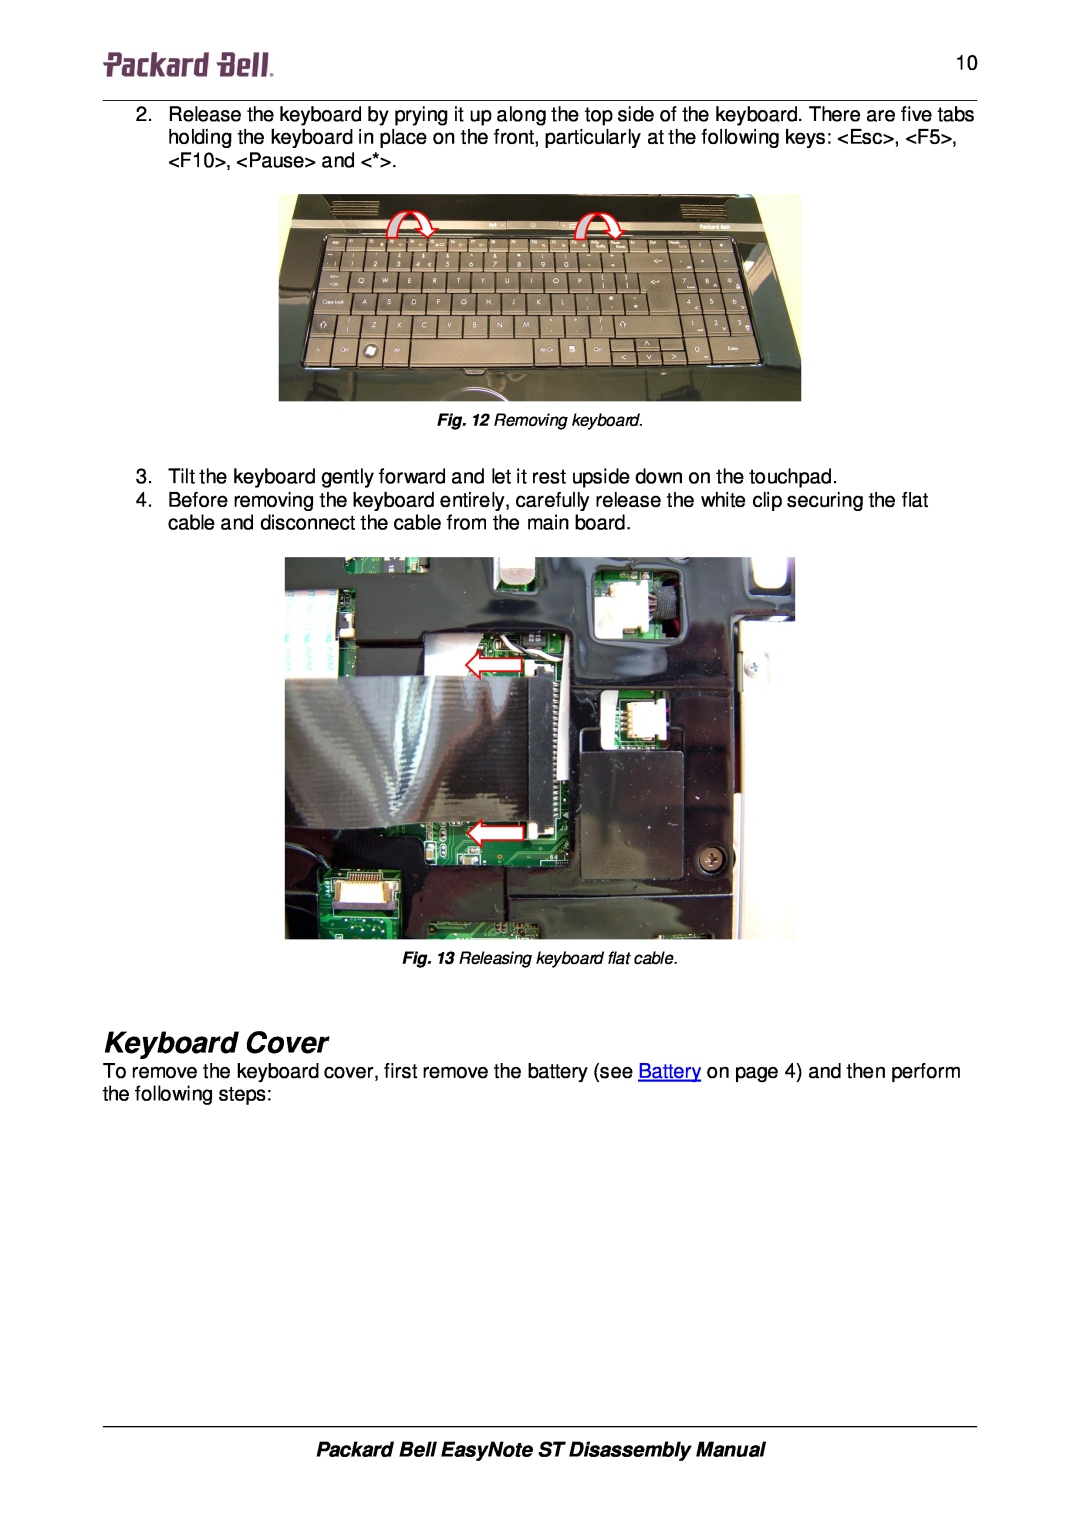 Packard Bell manual Keyboard Cover, Packard Bell EasyNote ST Disassembly Manual 